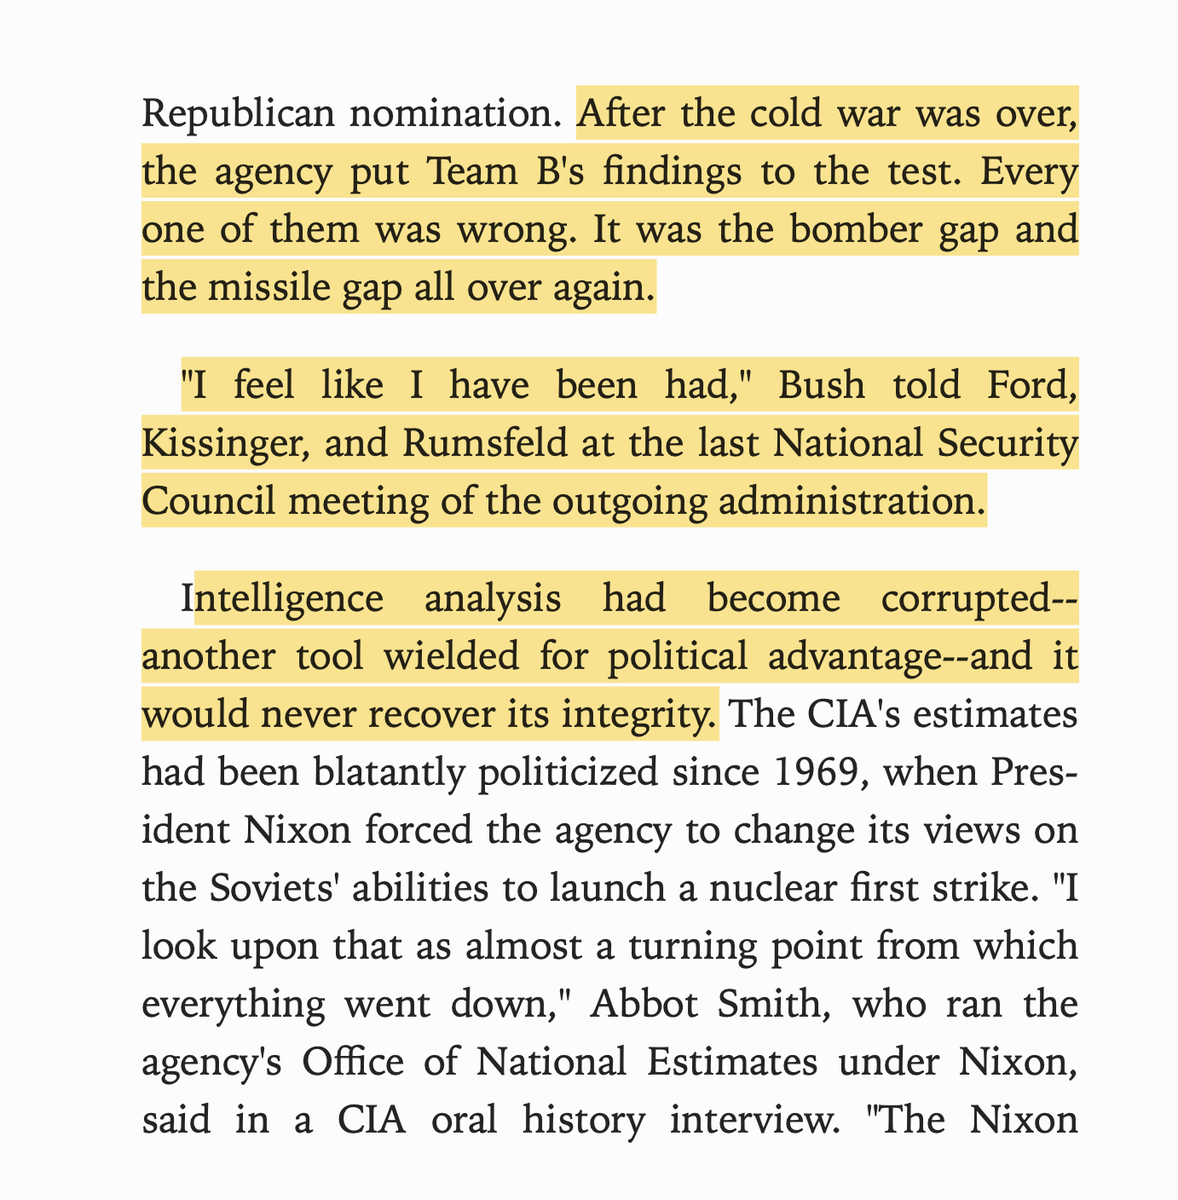 Neo-cons have been cooking intelligence to justify military aggression for a lot longer than you might think.